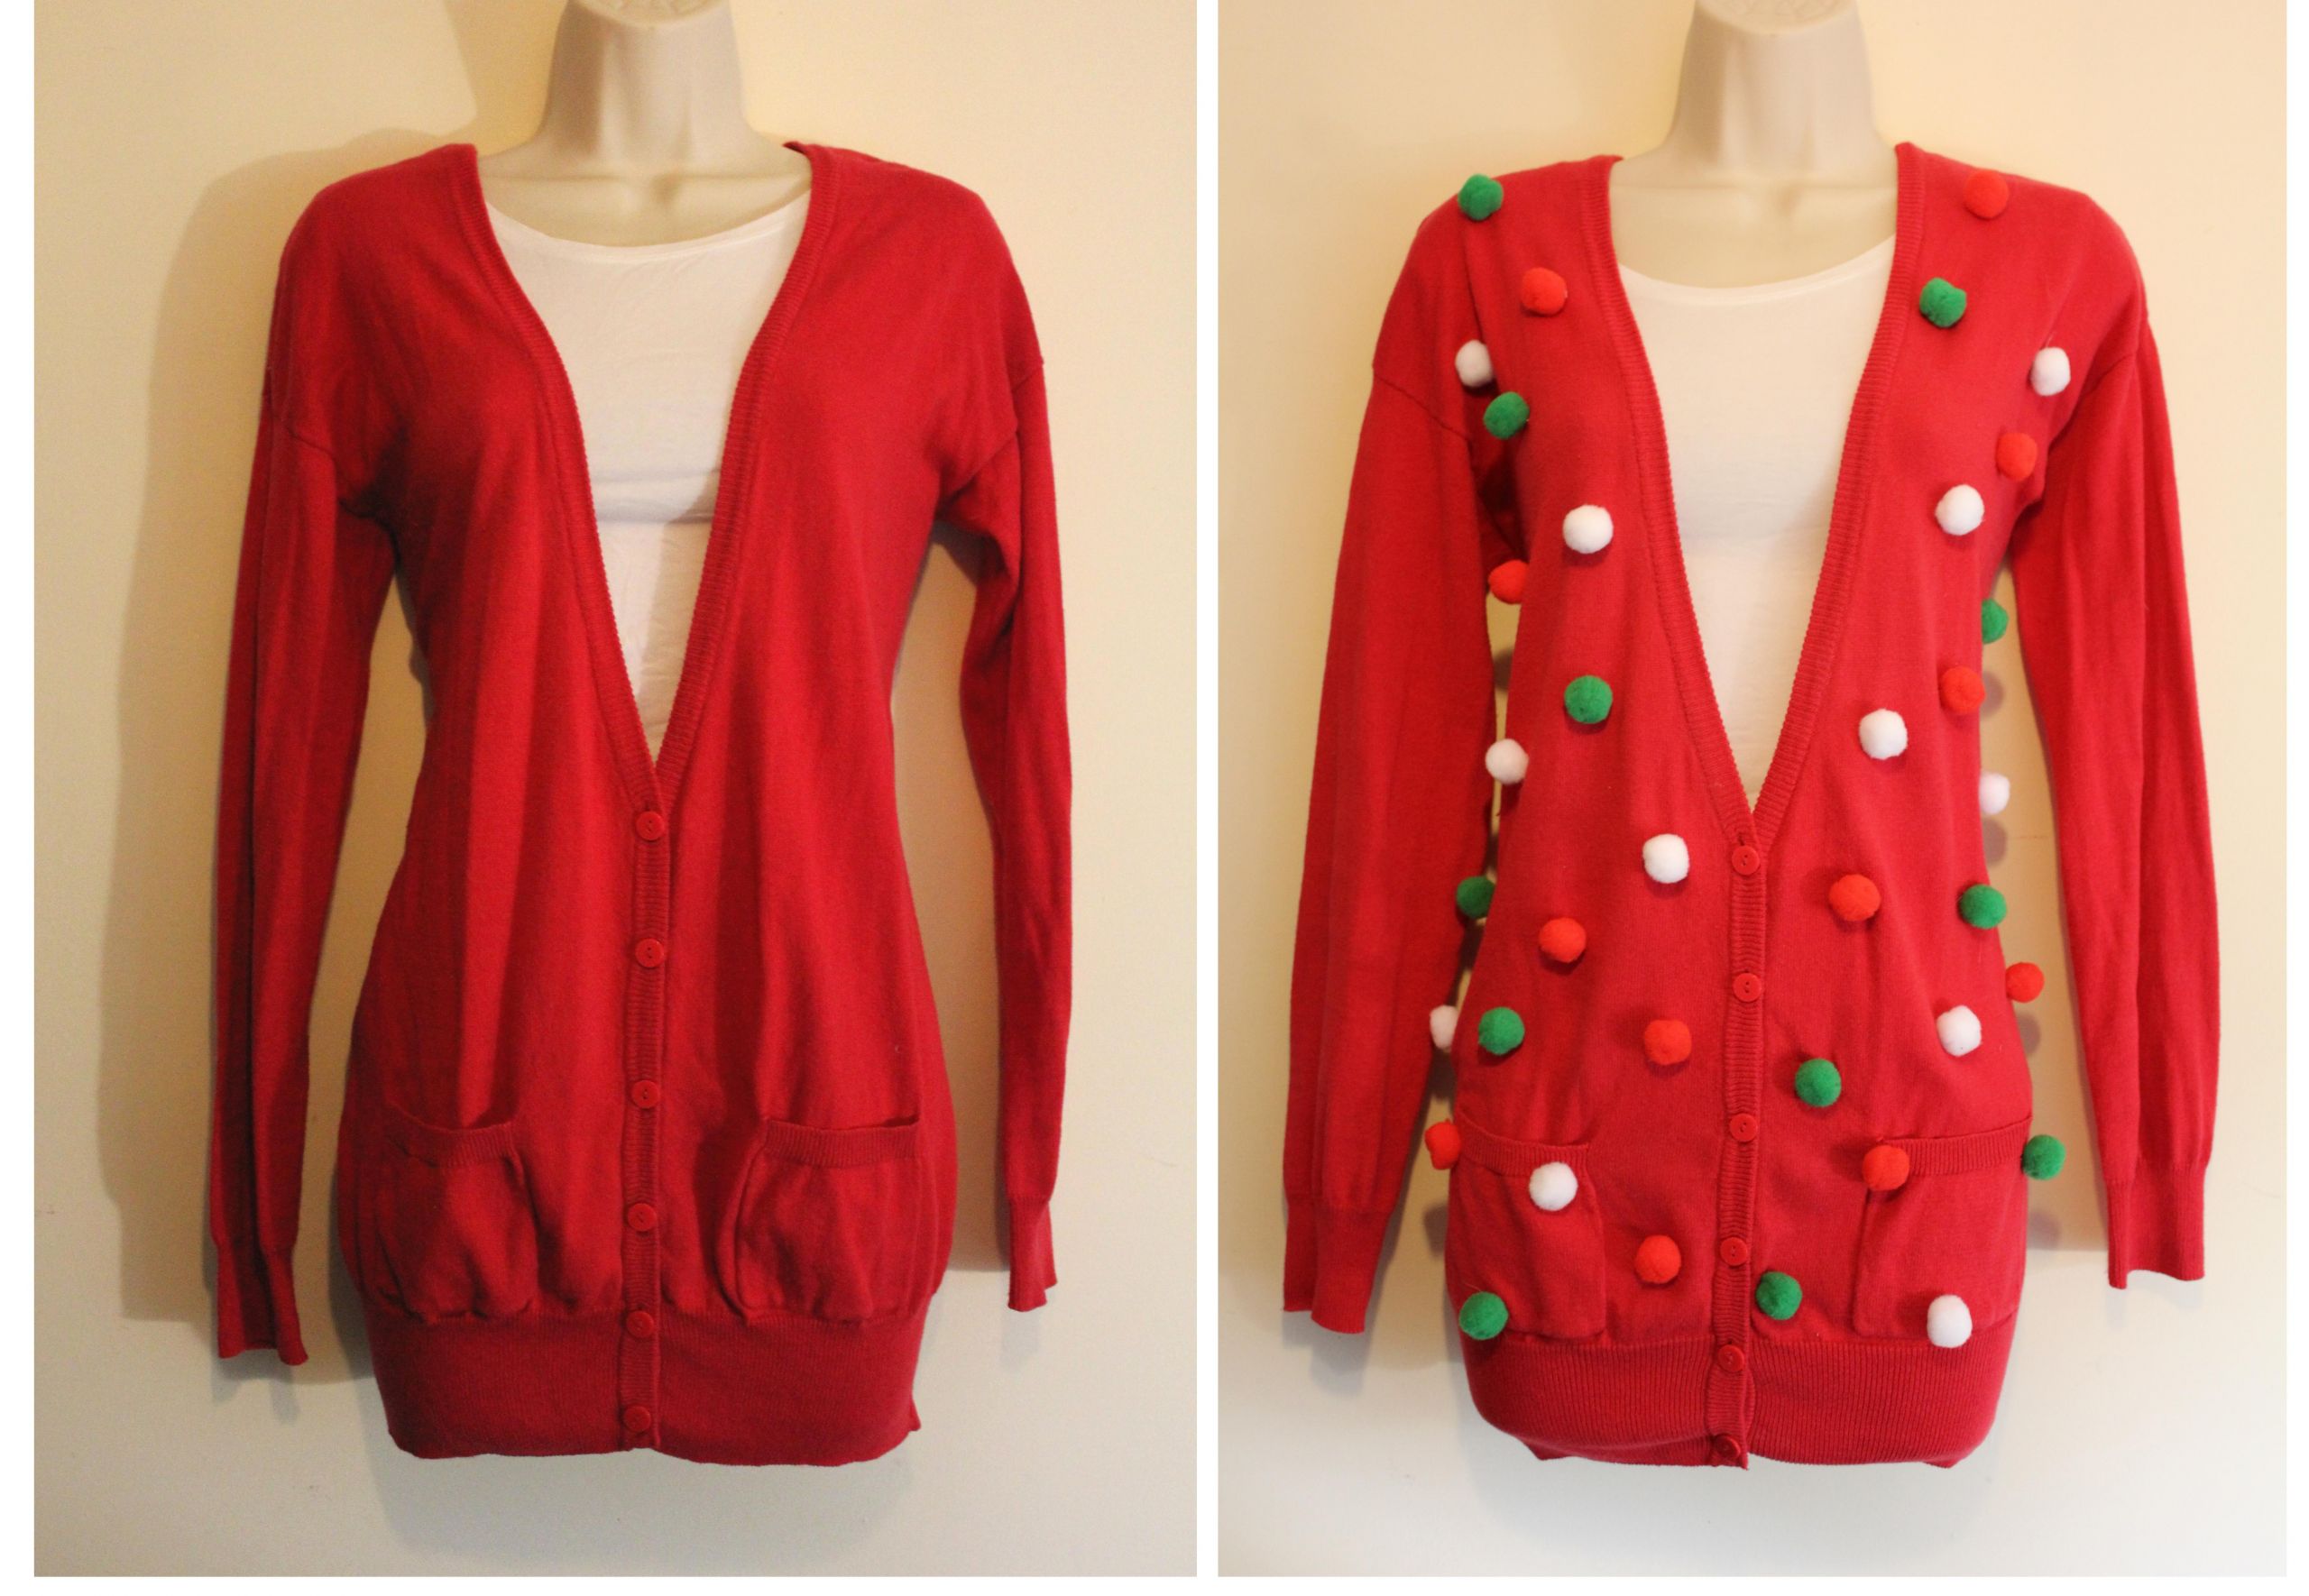 DIY Christmas Jumper
 Thrifty fashion DIY funk up your knitwear for Christmas